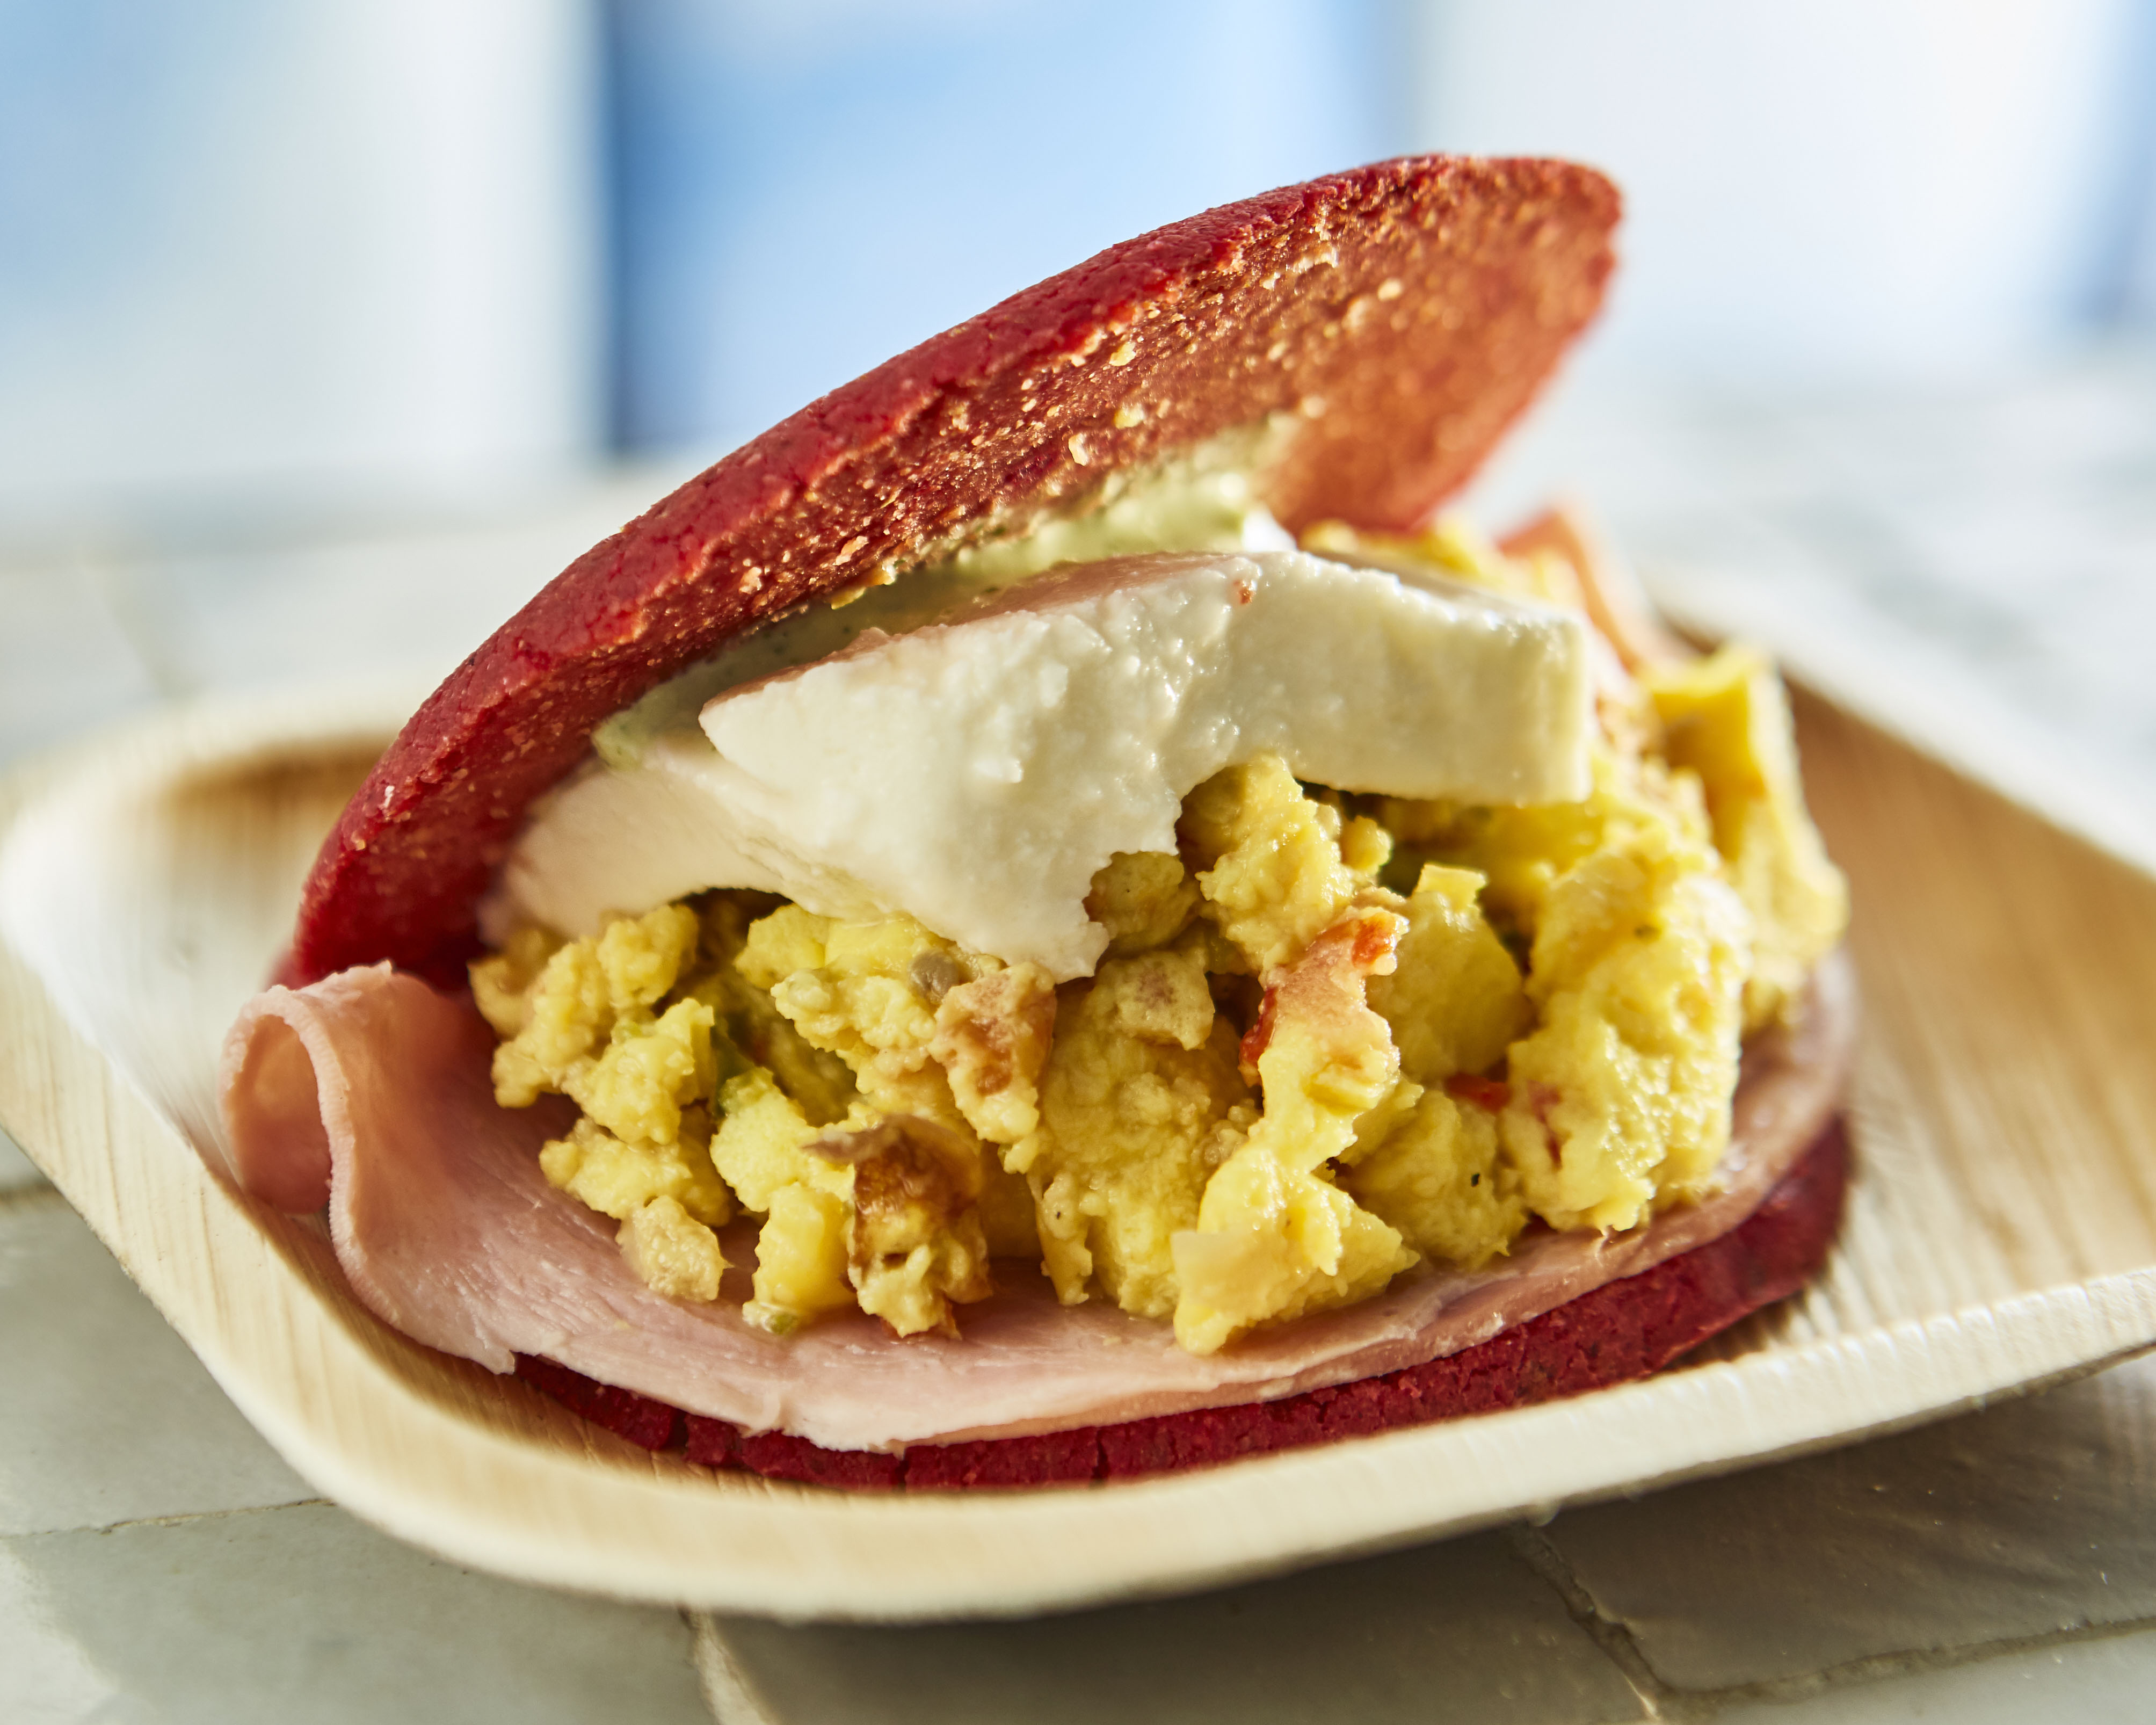 Now you can make authentic homestyle breakfast areppas with a contemporary twist, thanks to the restaurant's executive chef, and Venezuelan native, Gabriela Machado. She's handled all the details, from shopping list to cooking instructions. This recipe for Morningstyle Areppas from Chef Machado features corn flour, ham and eggs, beets, tomato and scallions.